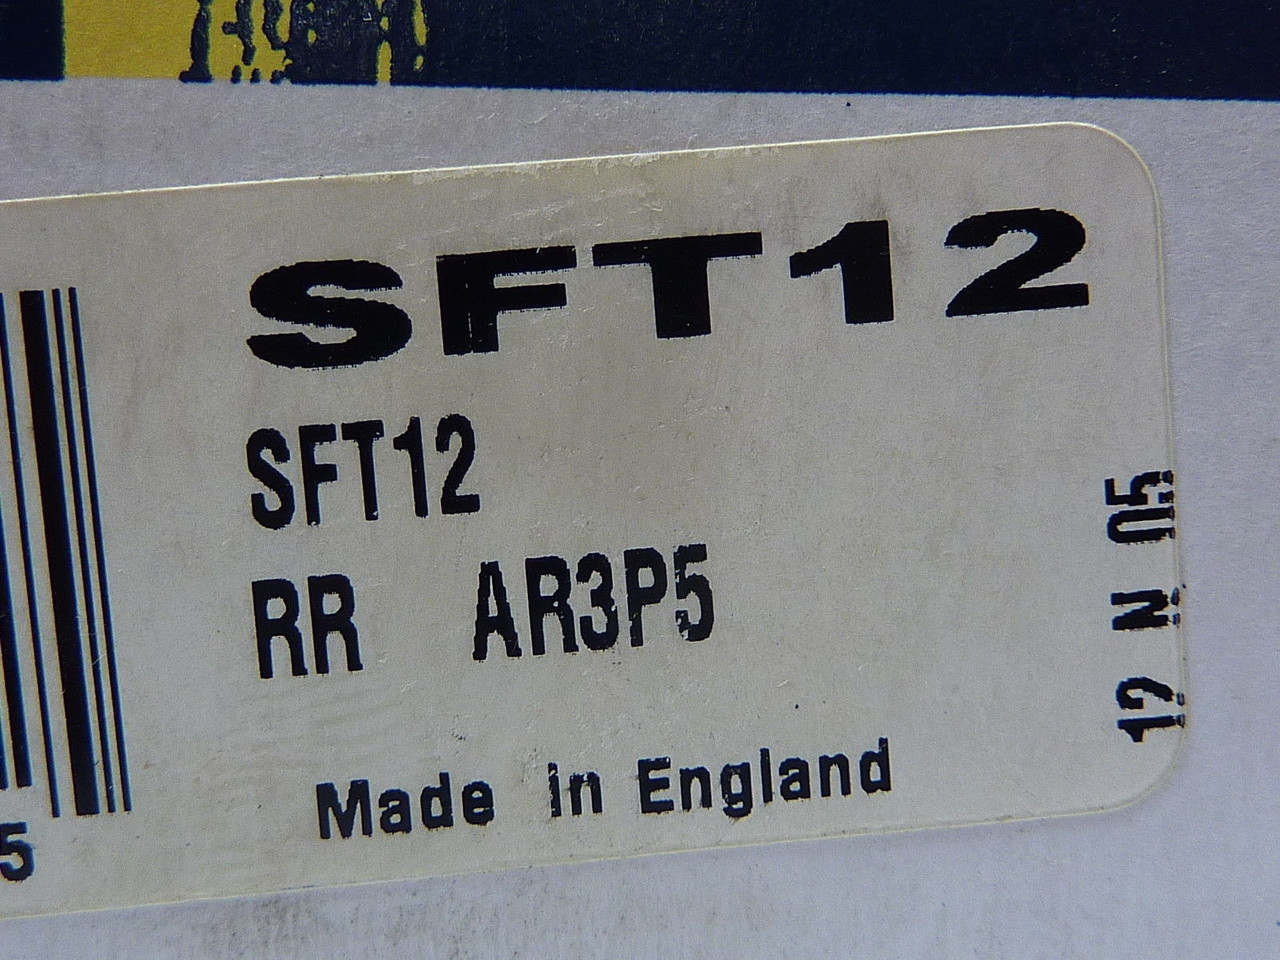 RHP SFT-12 (RR AR3P5) 2-Bolt Flanged Bearing ! NEW !